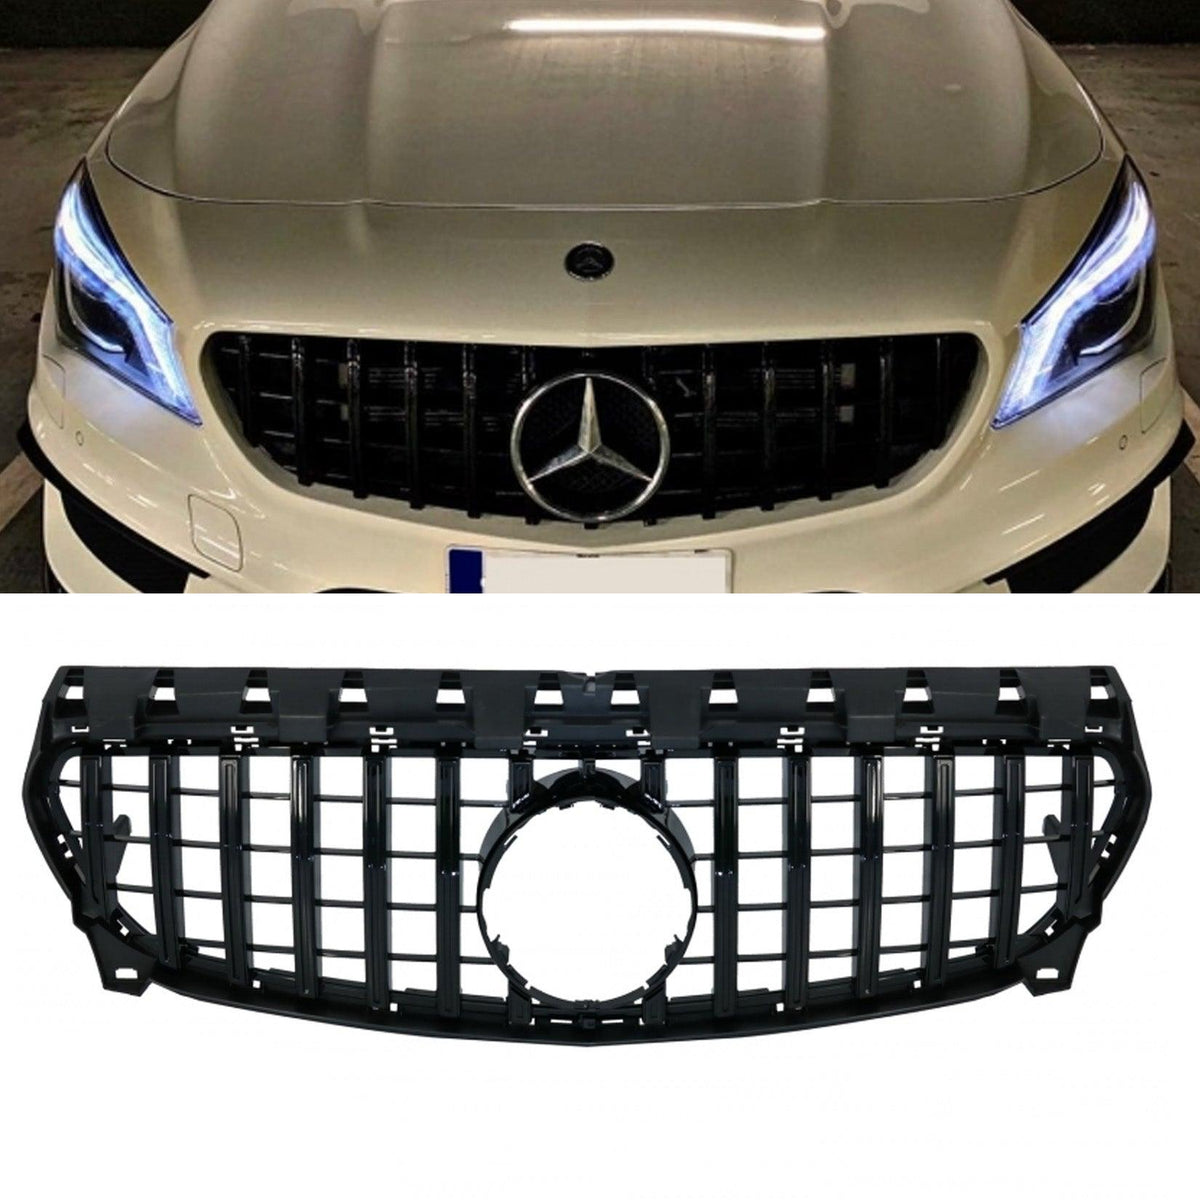 MERCEDES CLA W117 FACELIFT 2016-2018 - FRONT GRILL - PANAMERICANA GT-R STYLE - ALL BLACK - RisperStyling